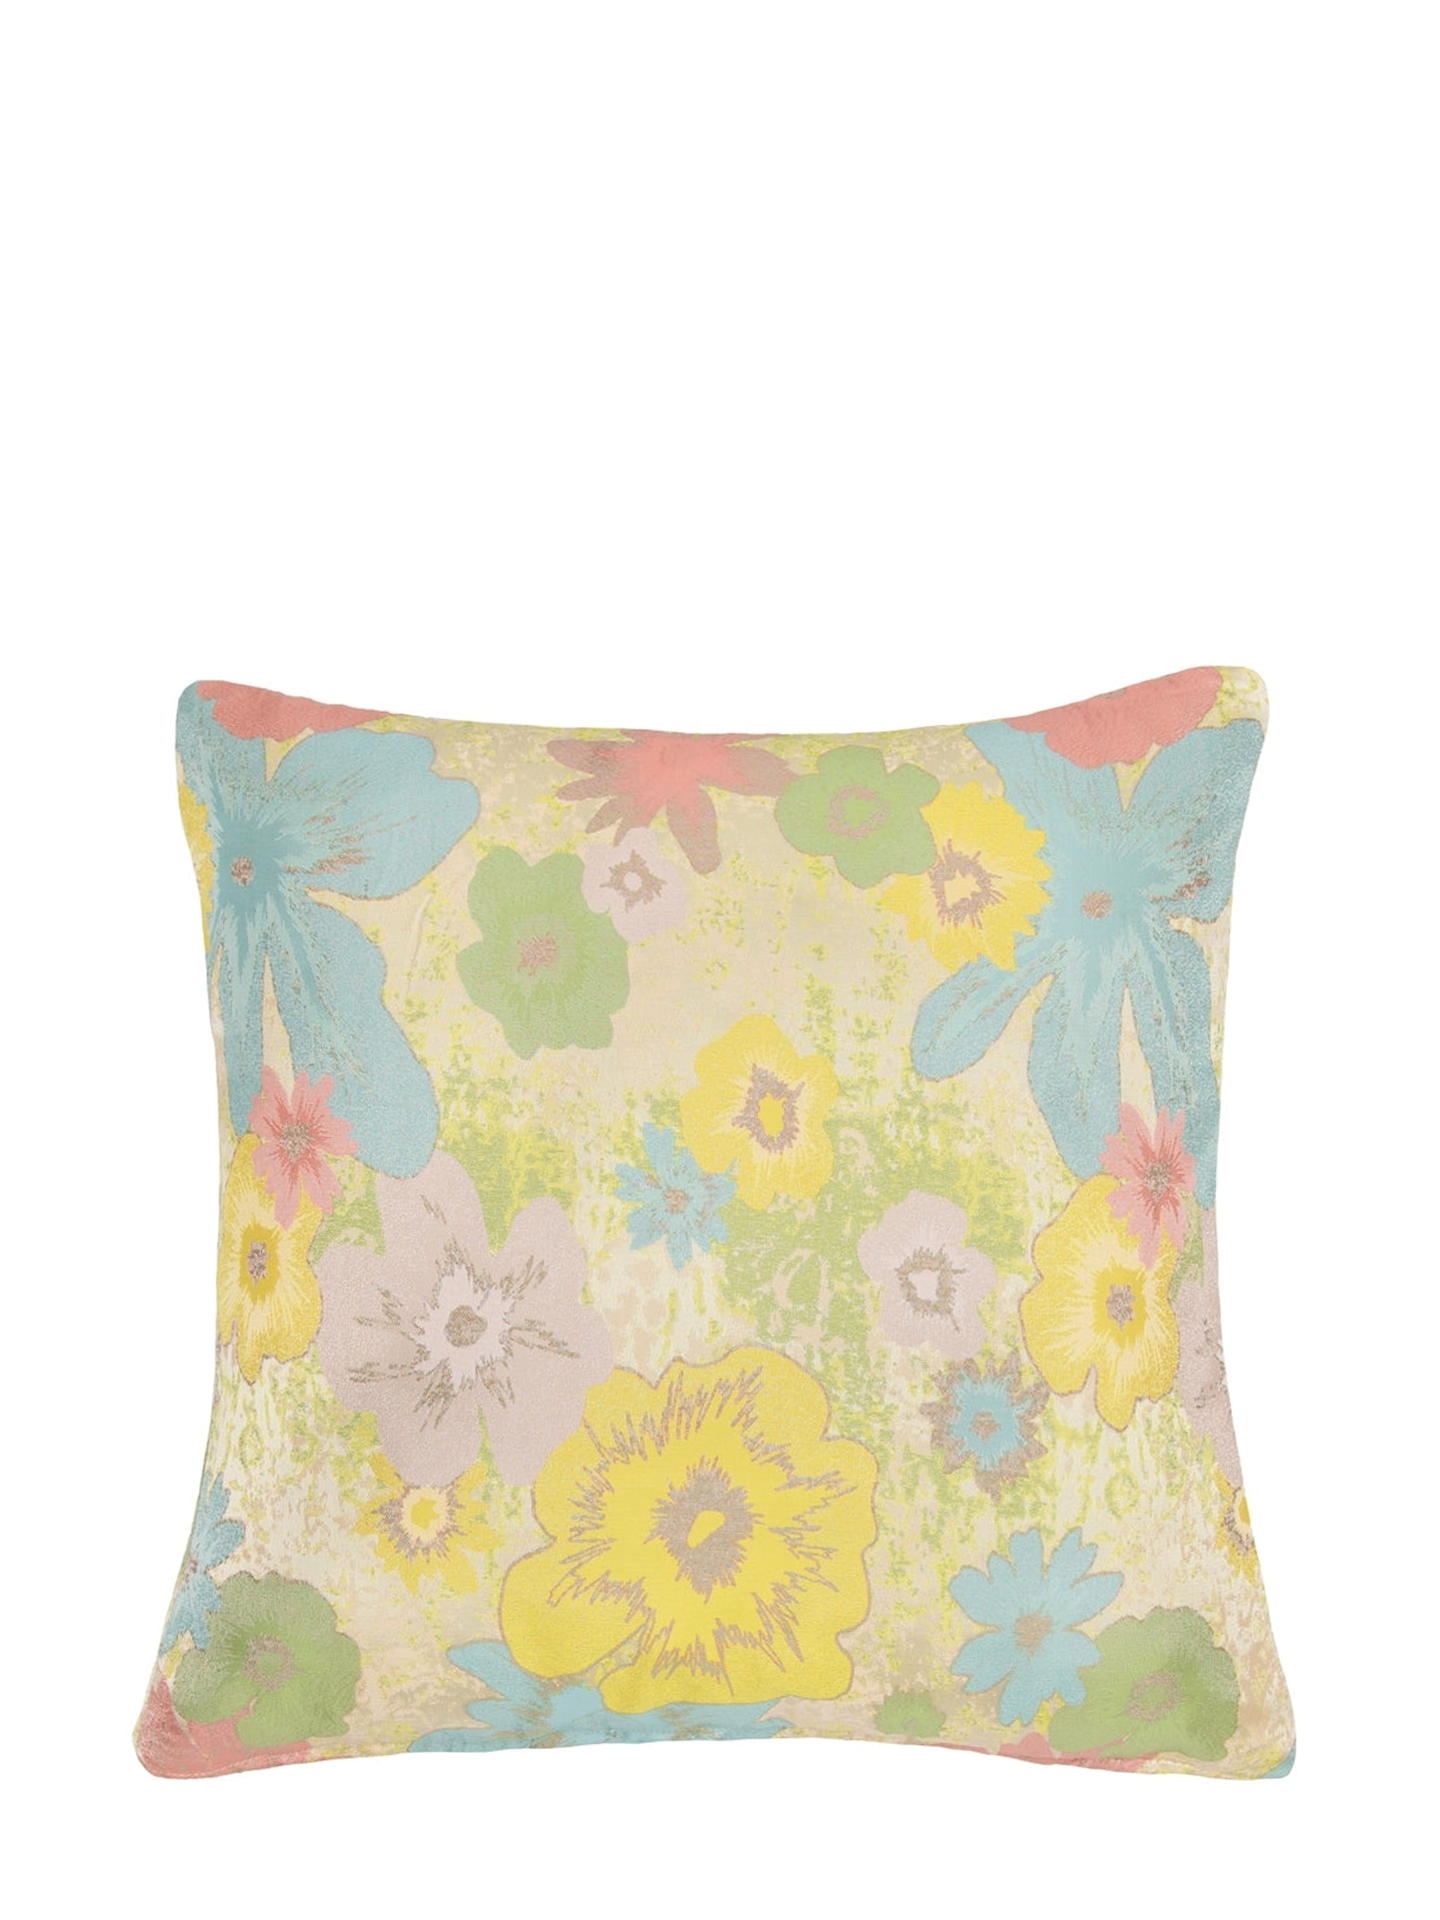 Yellow, turquoise and pink floral cushion